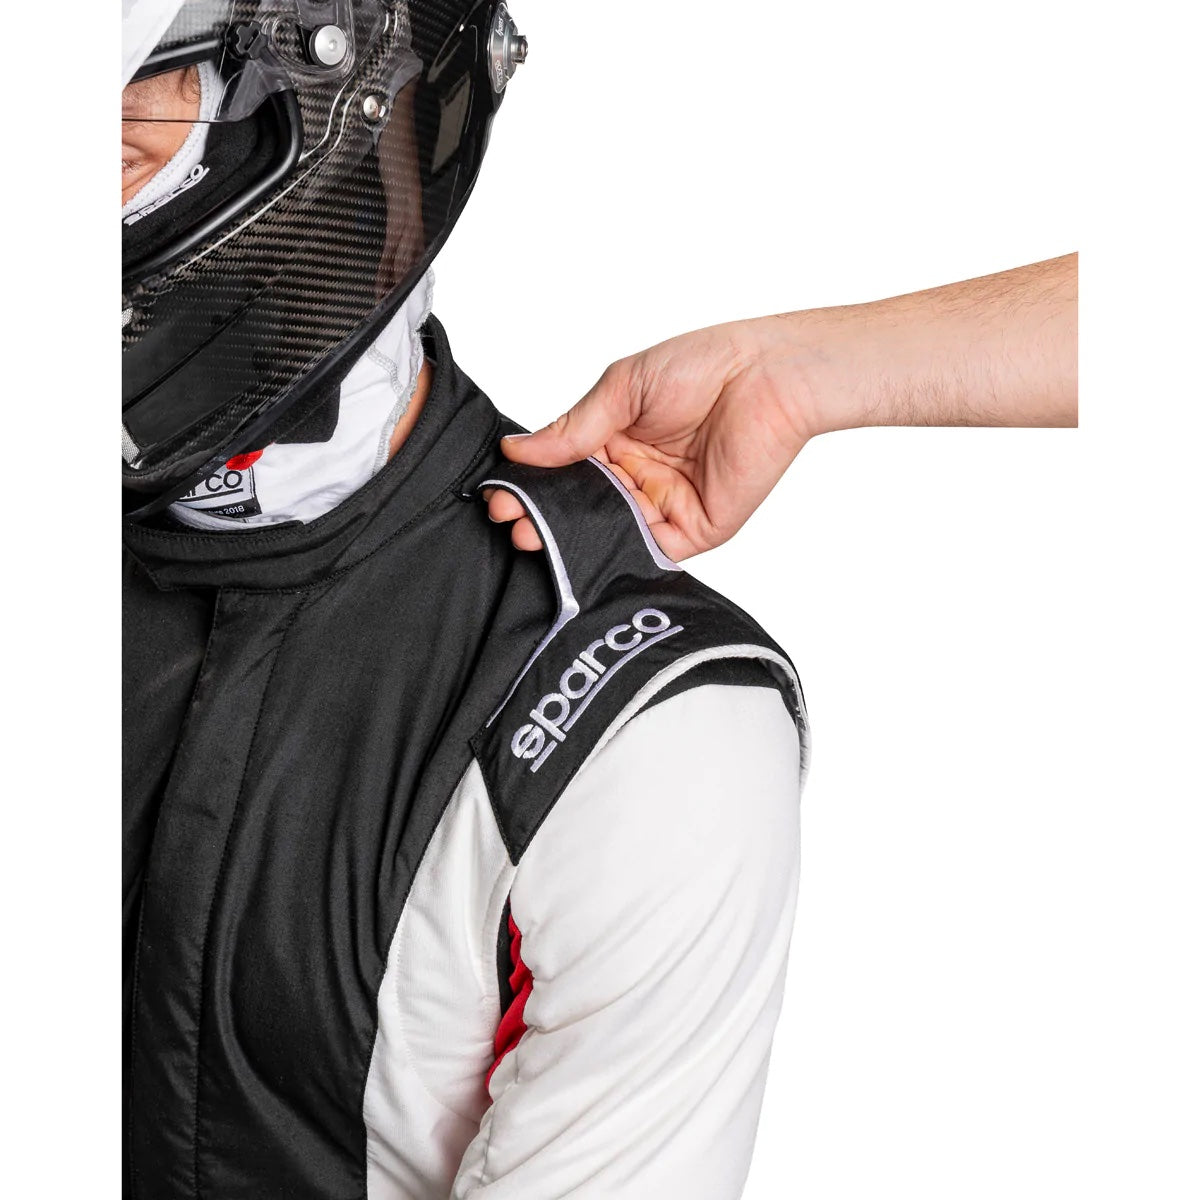 Sparco Competition USA Racing Suit Shoulder image